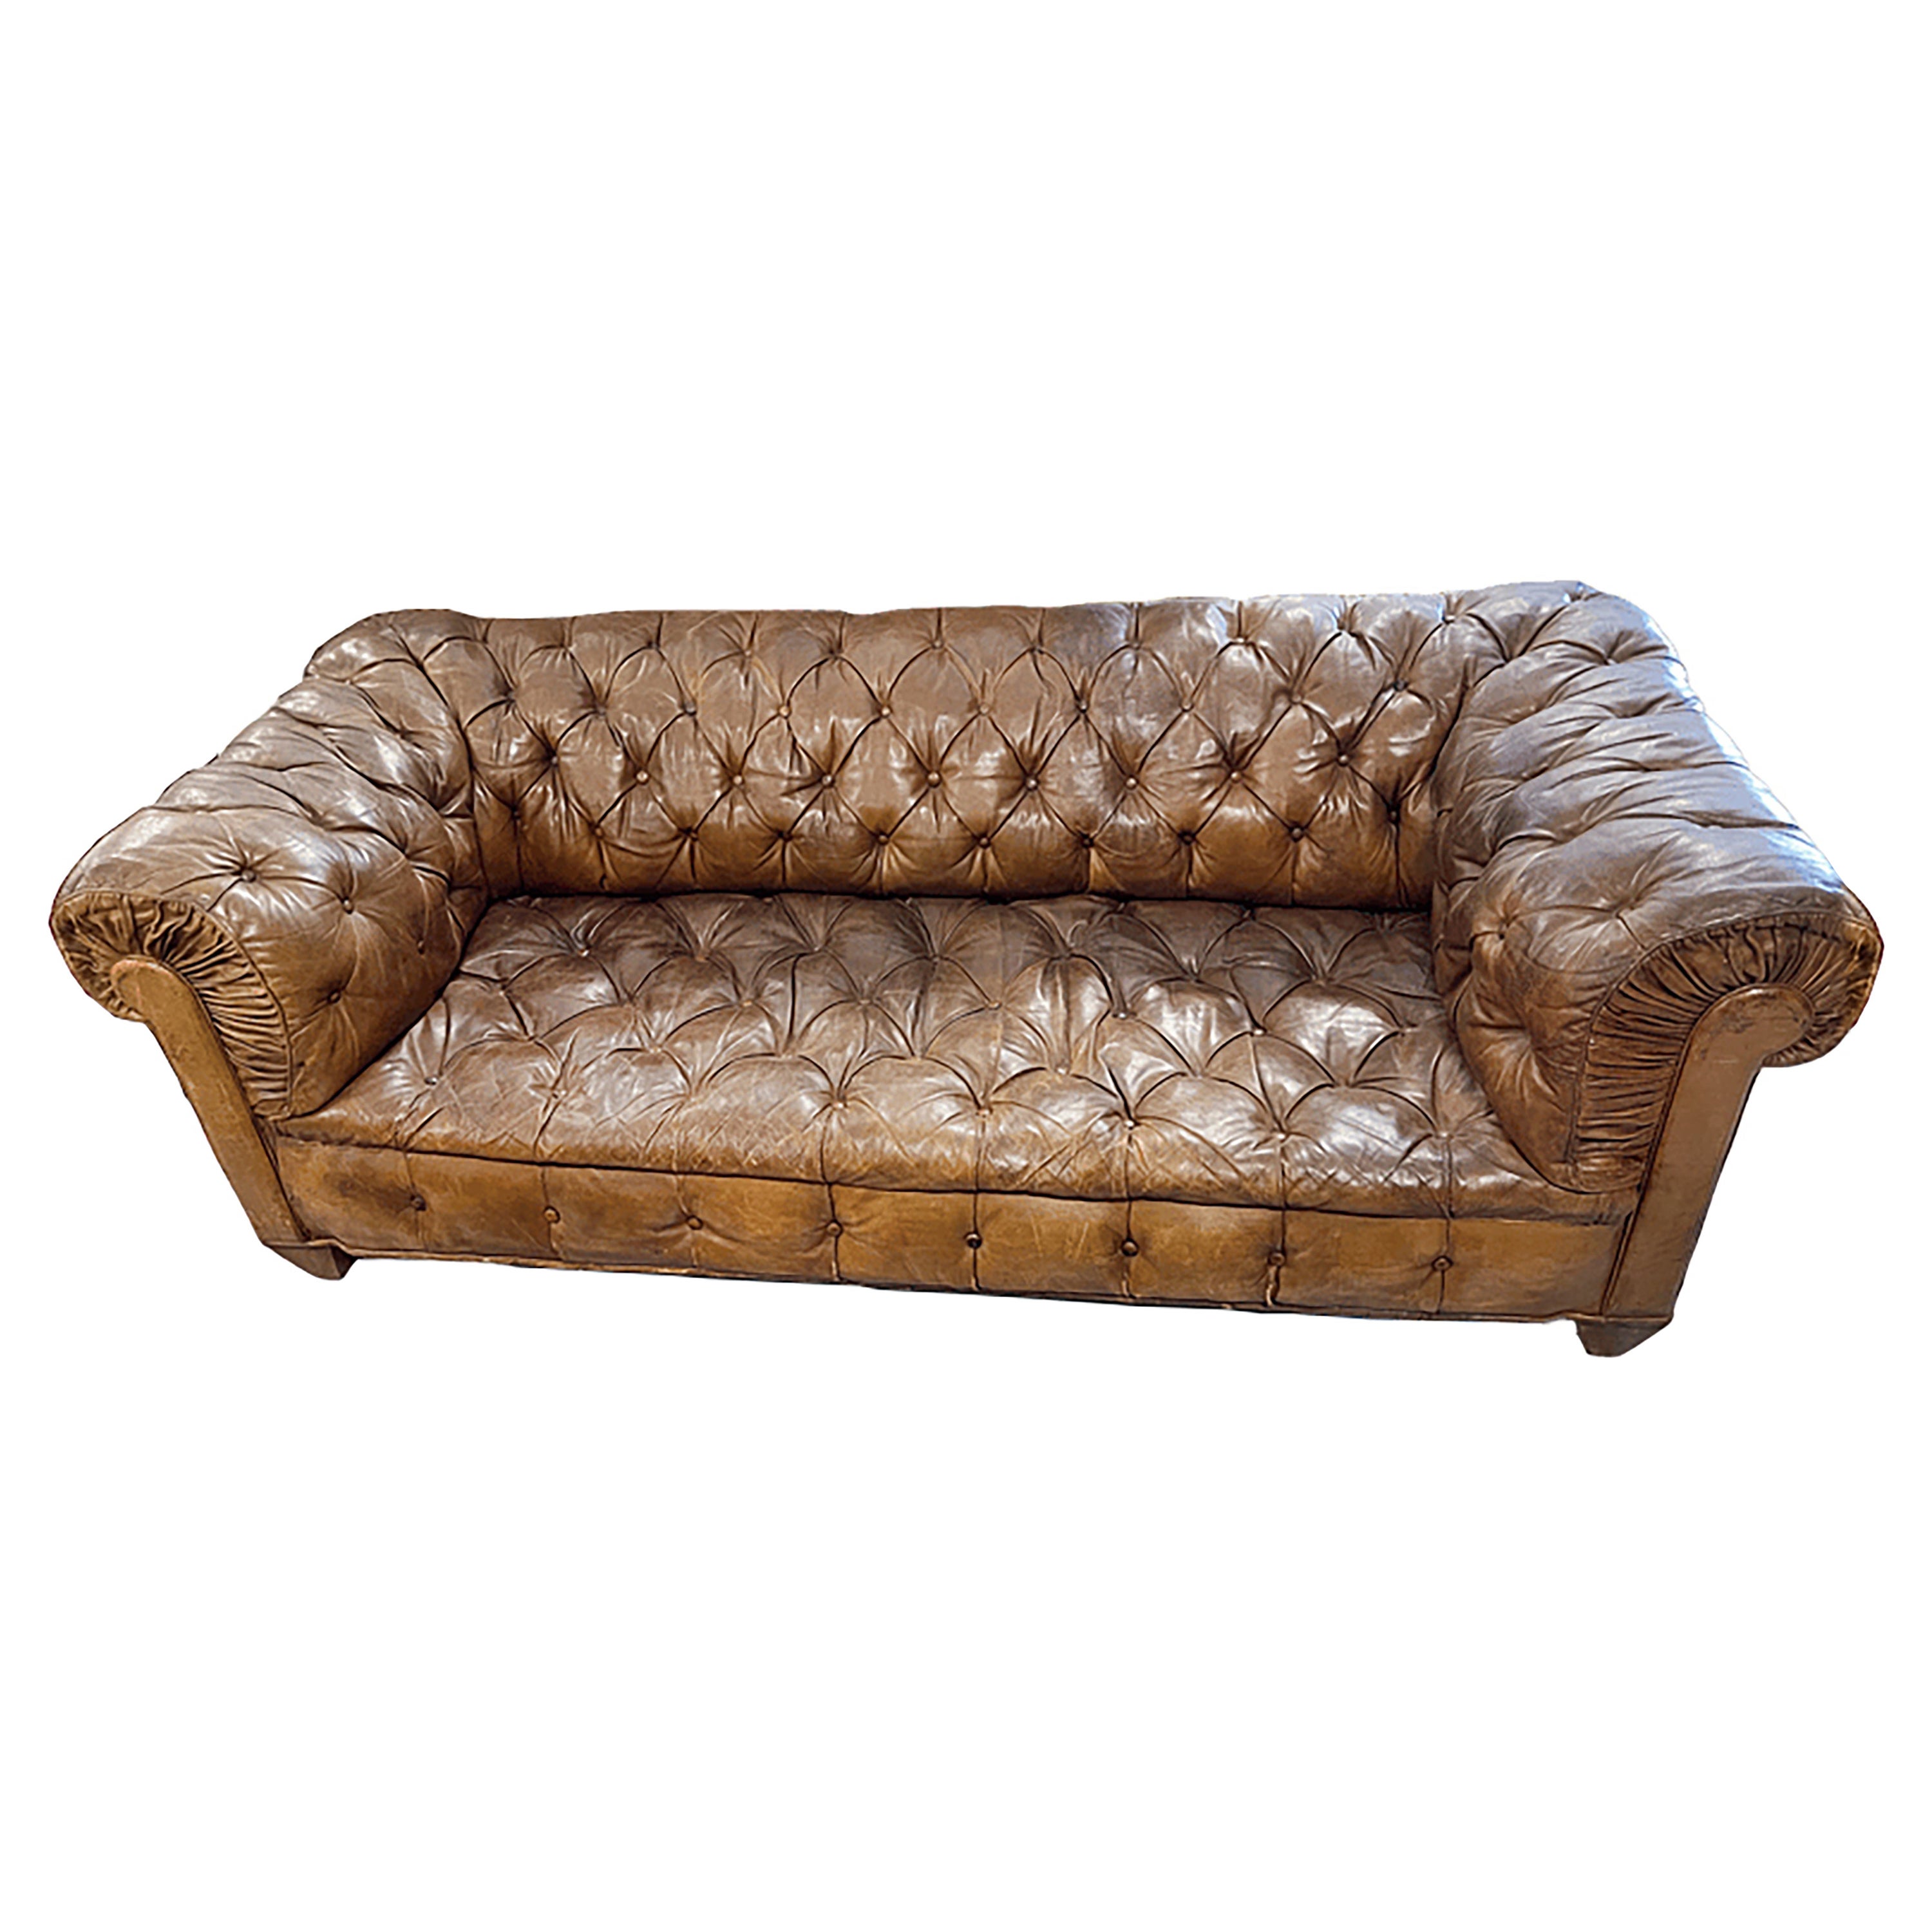 Vintage Tufted Chesterfield Sofa For Sale